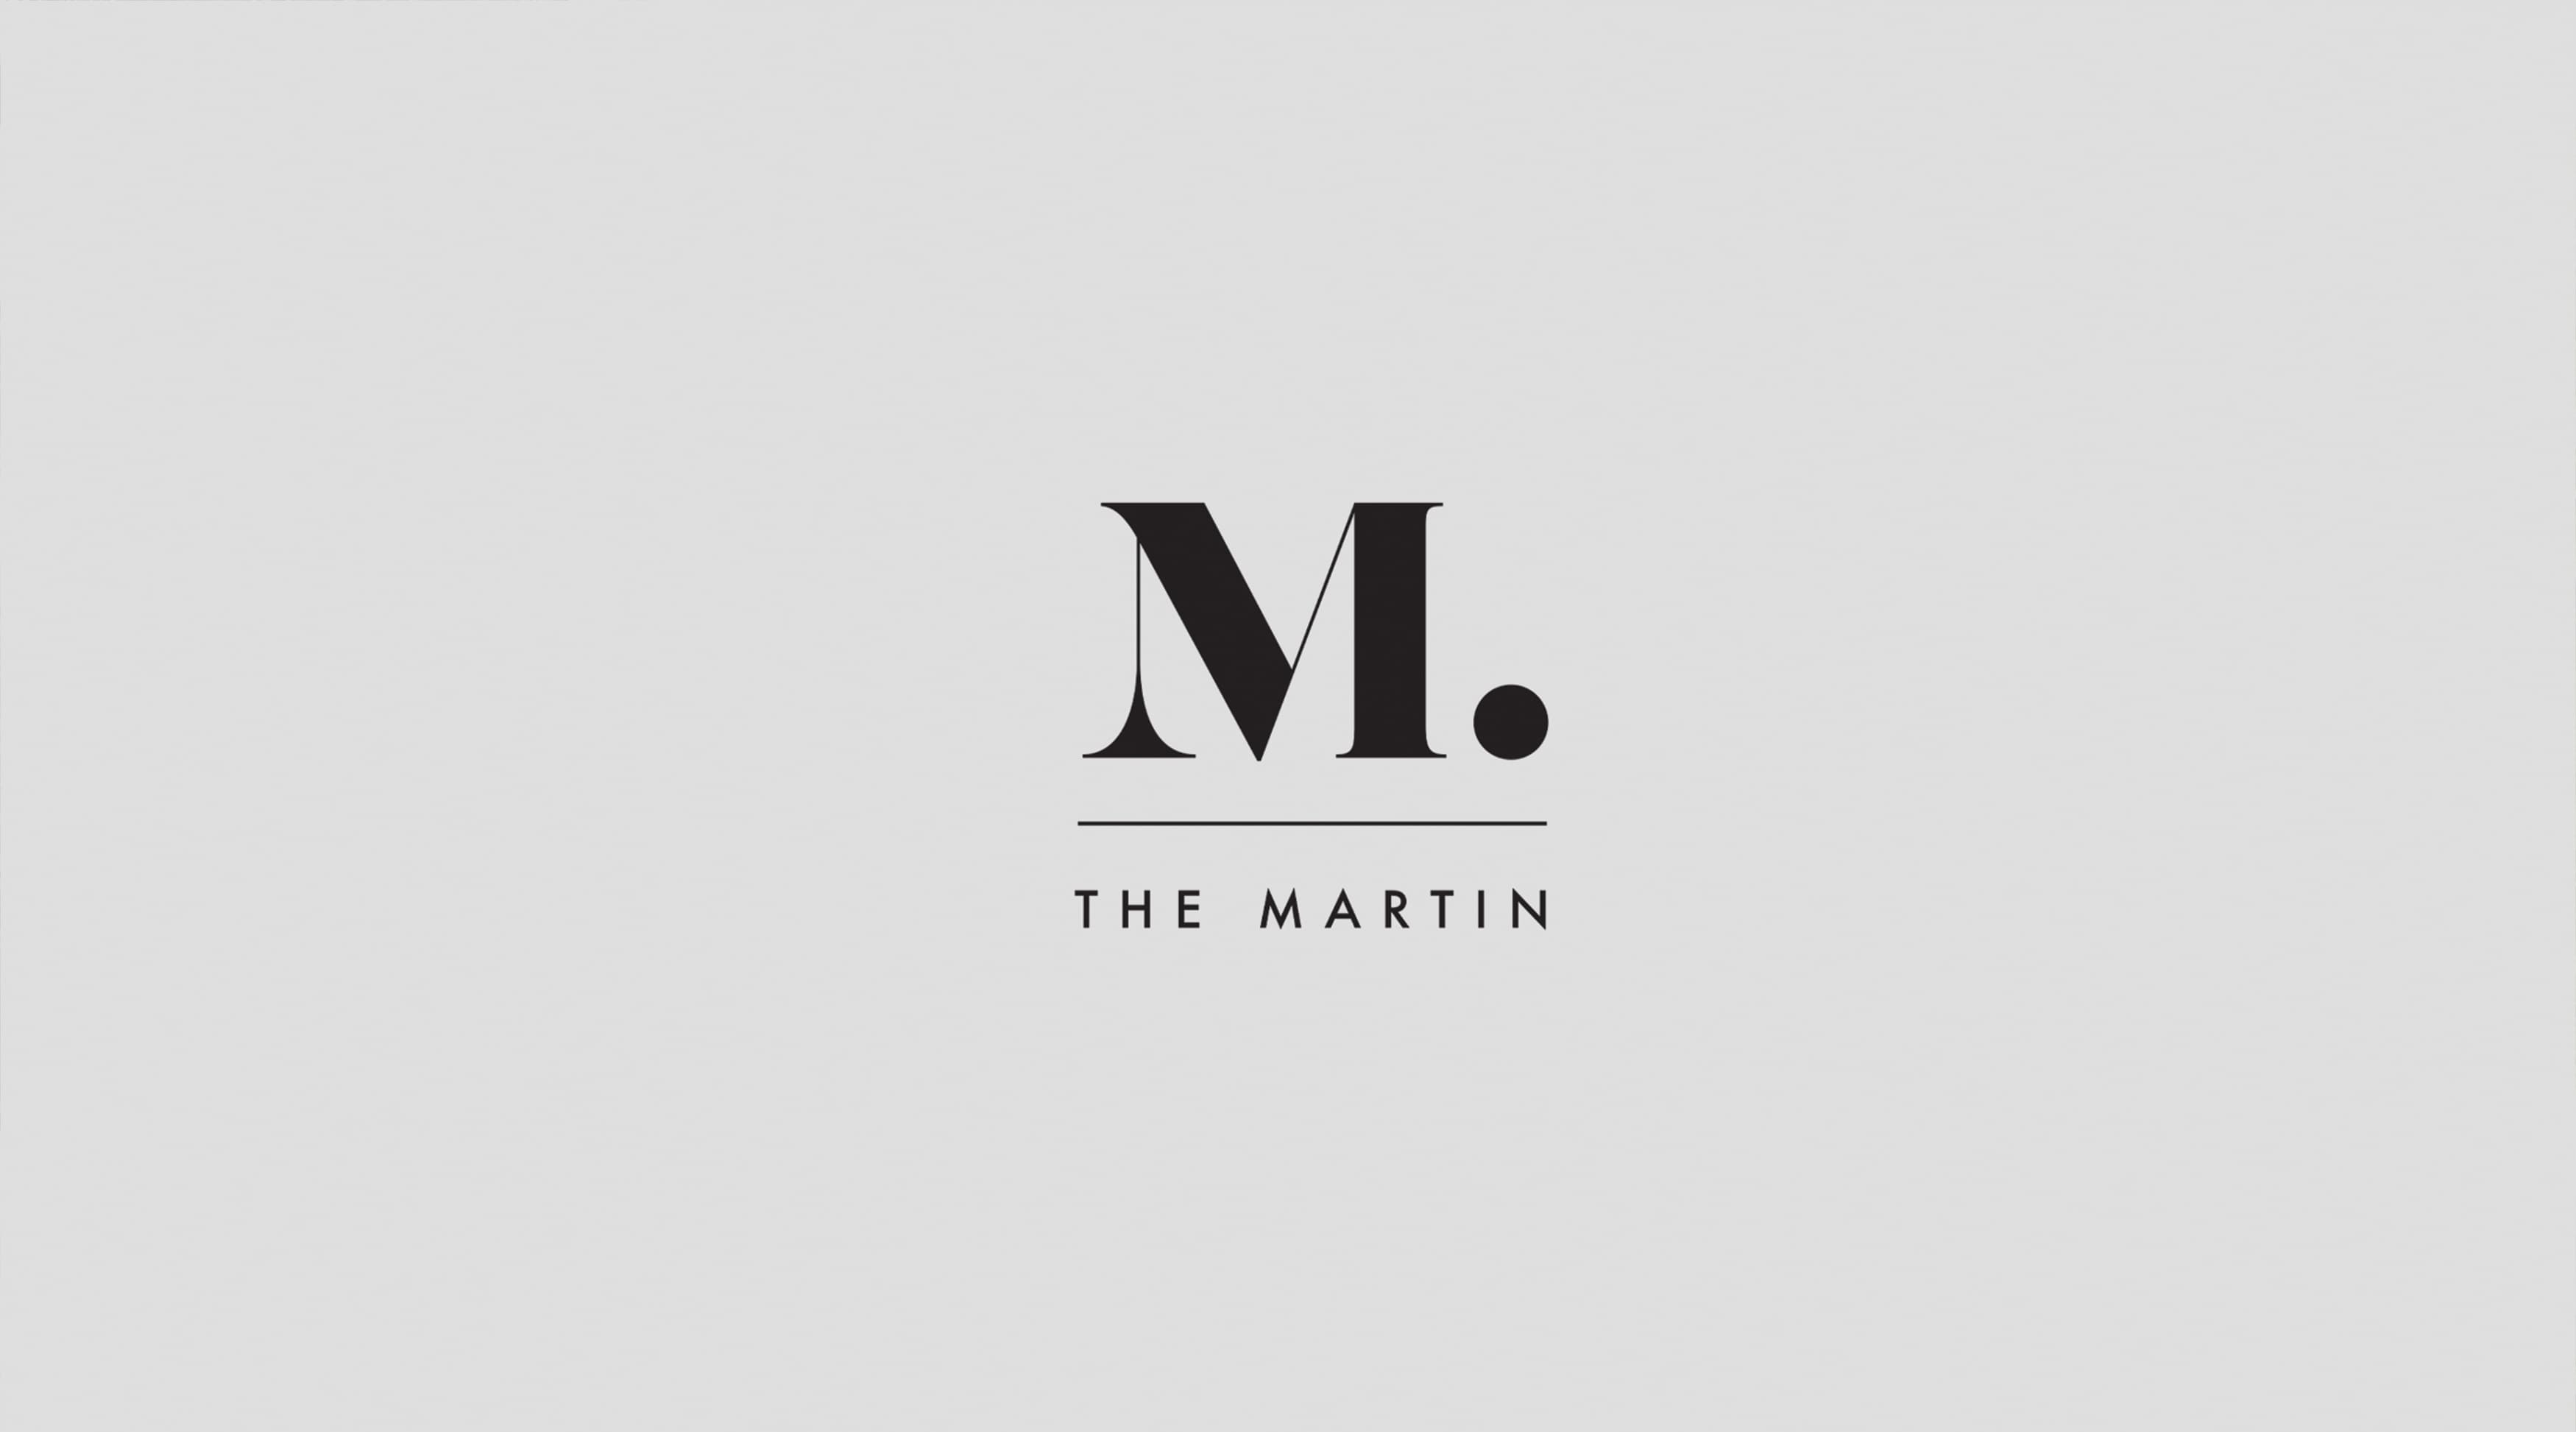 The Martin, San Francisco, Multi-Family Residential and Hospitality Branding